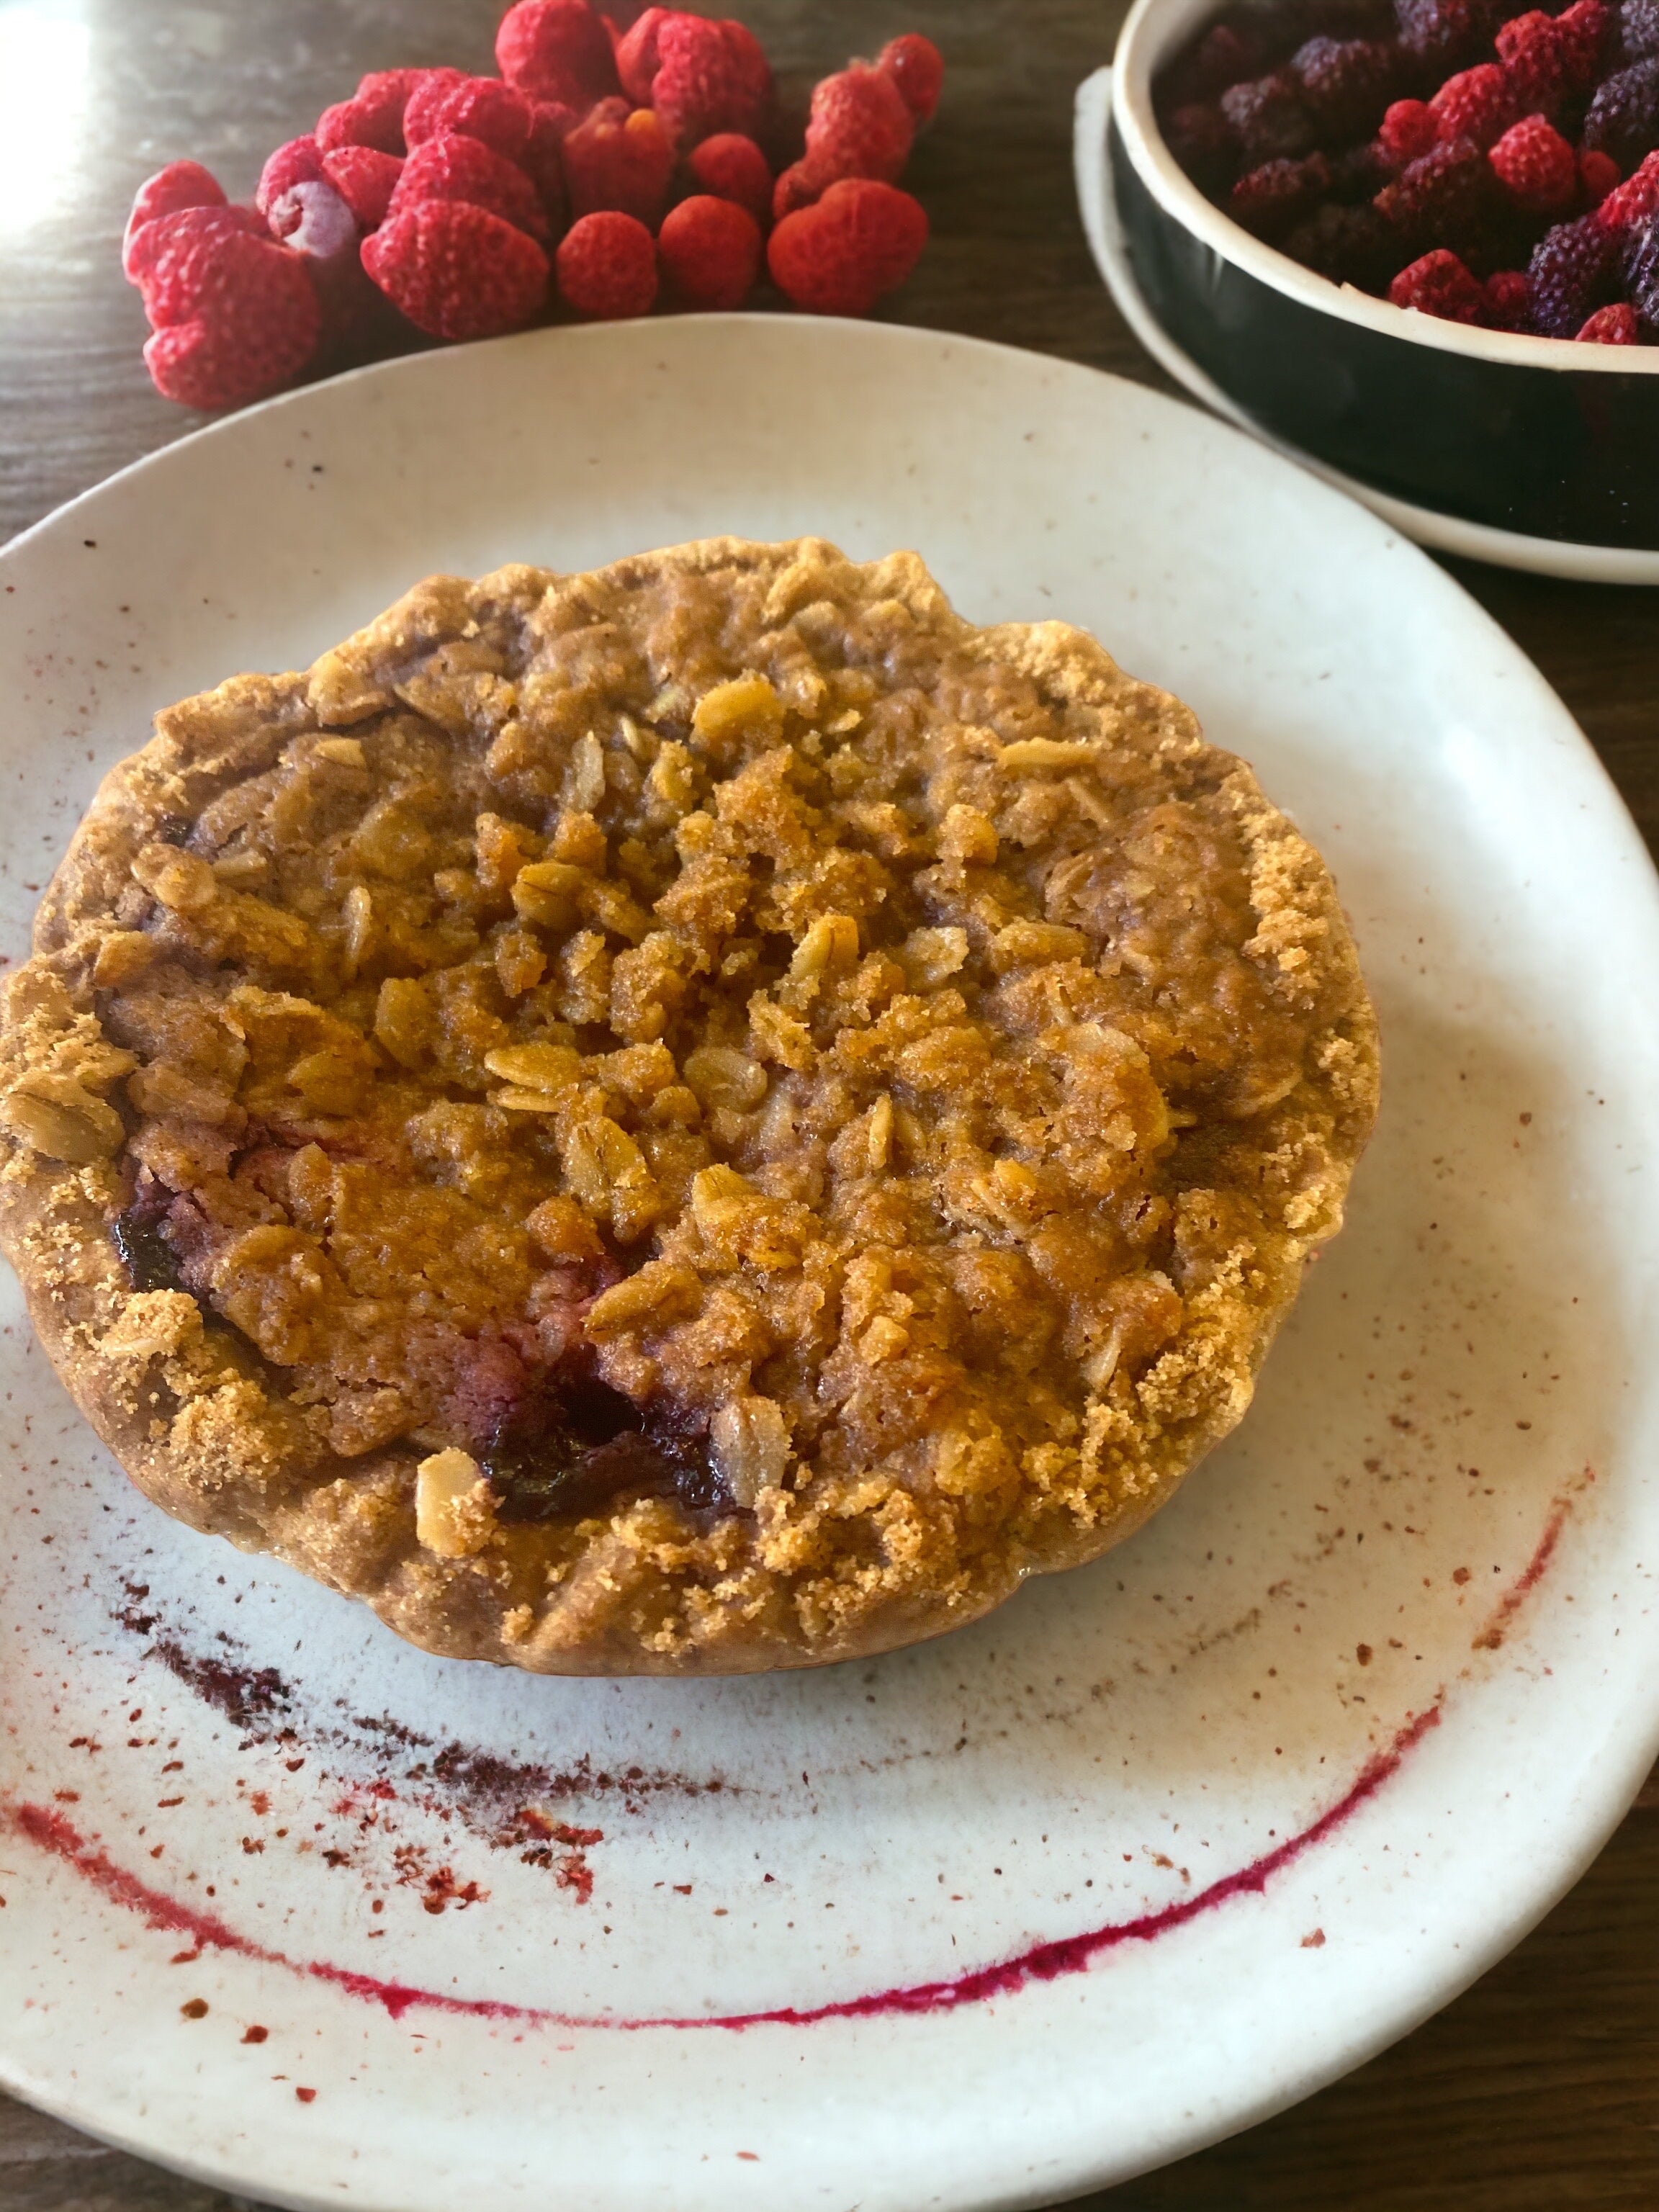 Mixed Berry Streusel Pie-5 INCH AND 9 INCH (Vegan, Soy & Gluten Free)